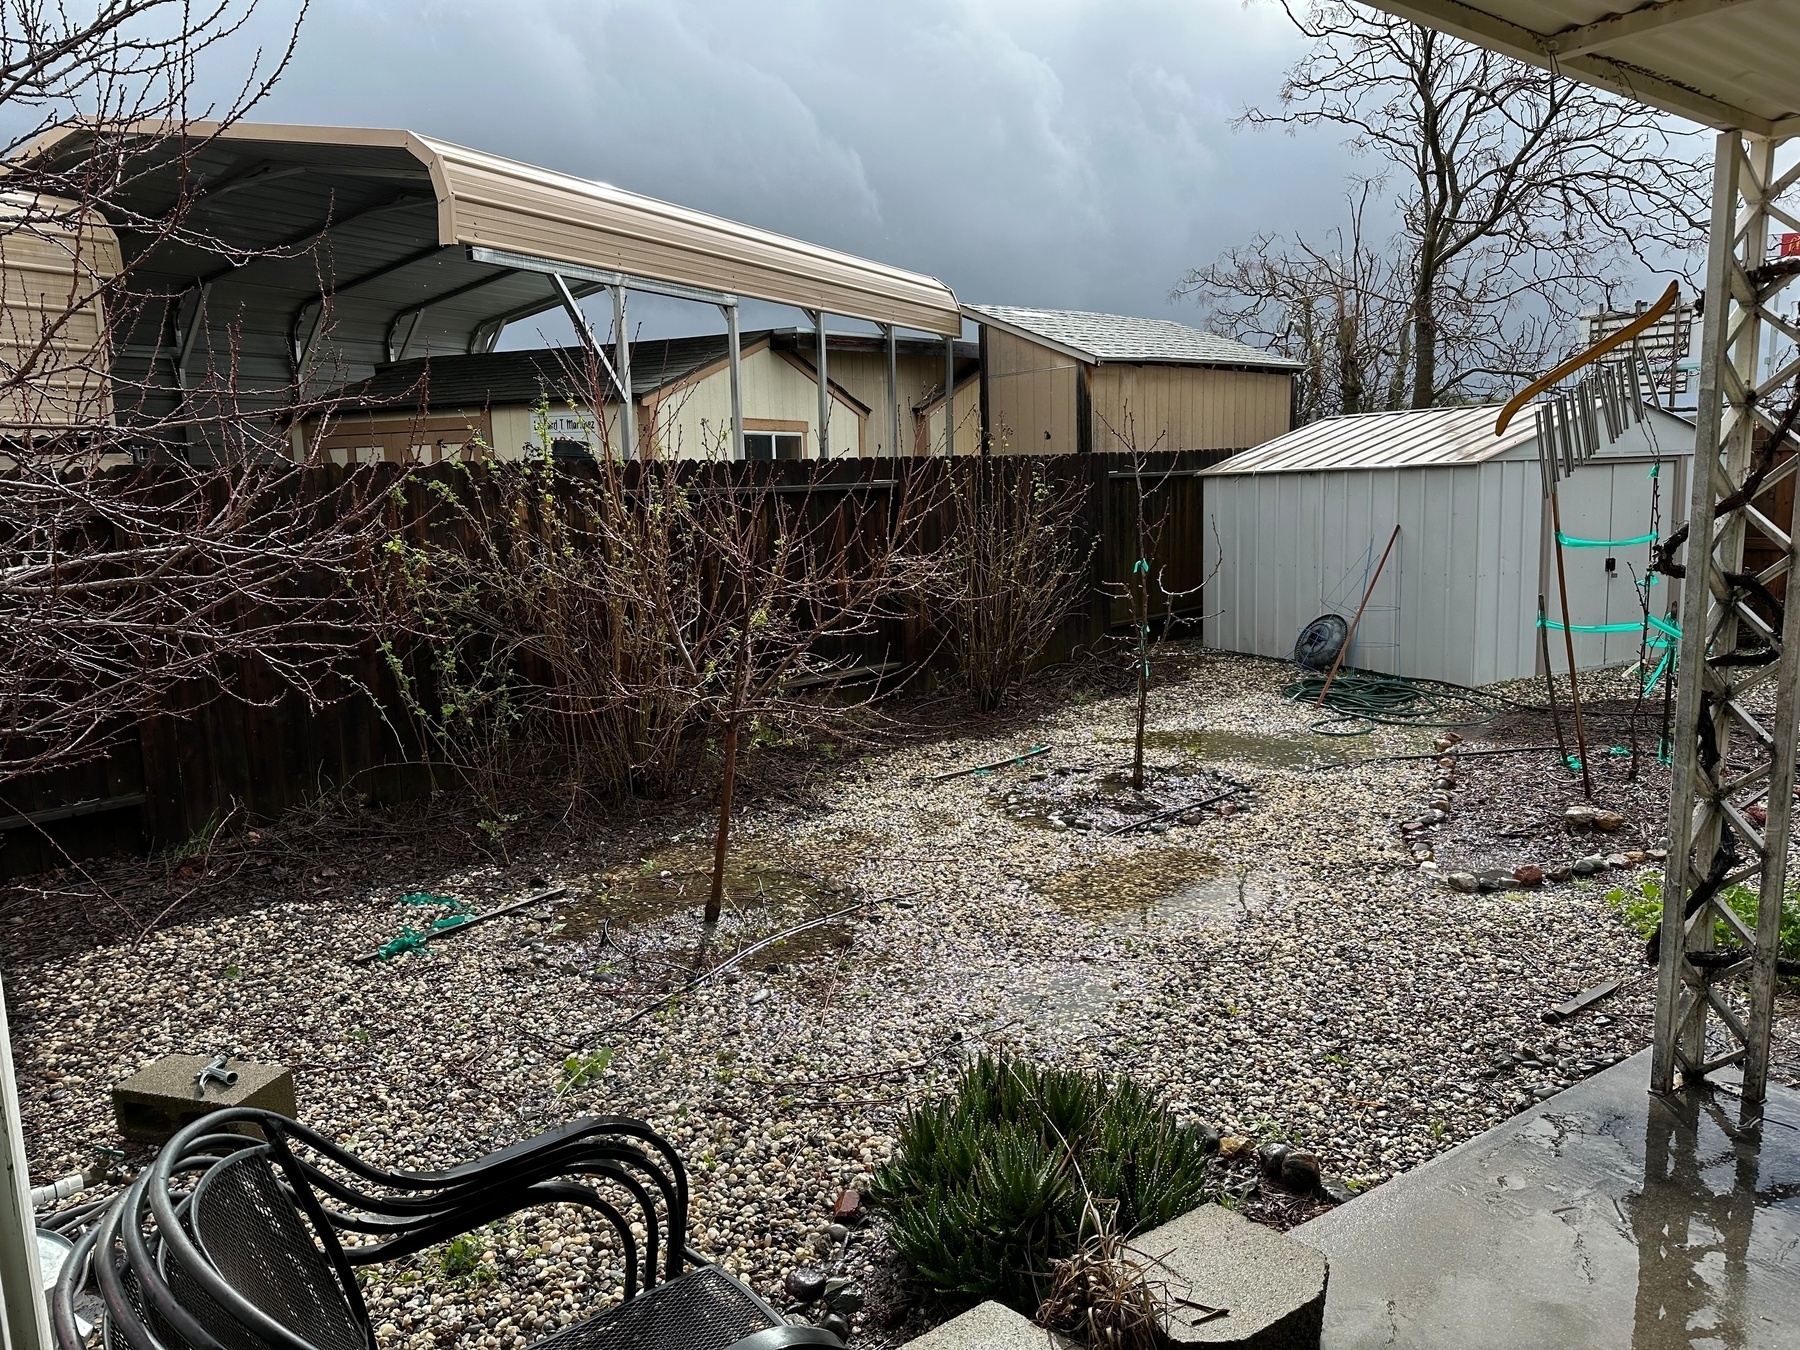 A backyard with gravel ground cover, leafless shrubs, a few young trees, and a metal garden shed. In the background, there’s a house with a carport. There is also garden equipment scattered around, heavy clouds above suggesting impending rain. Puddles of rain and roofs are bright as sunshine has broken through the clouds.